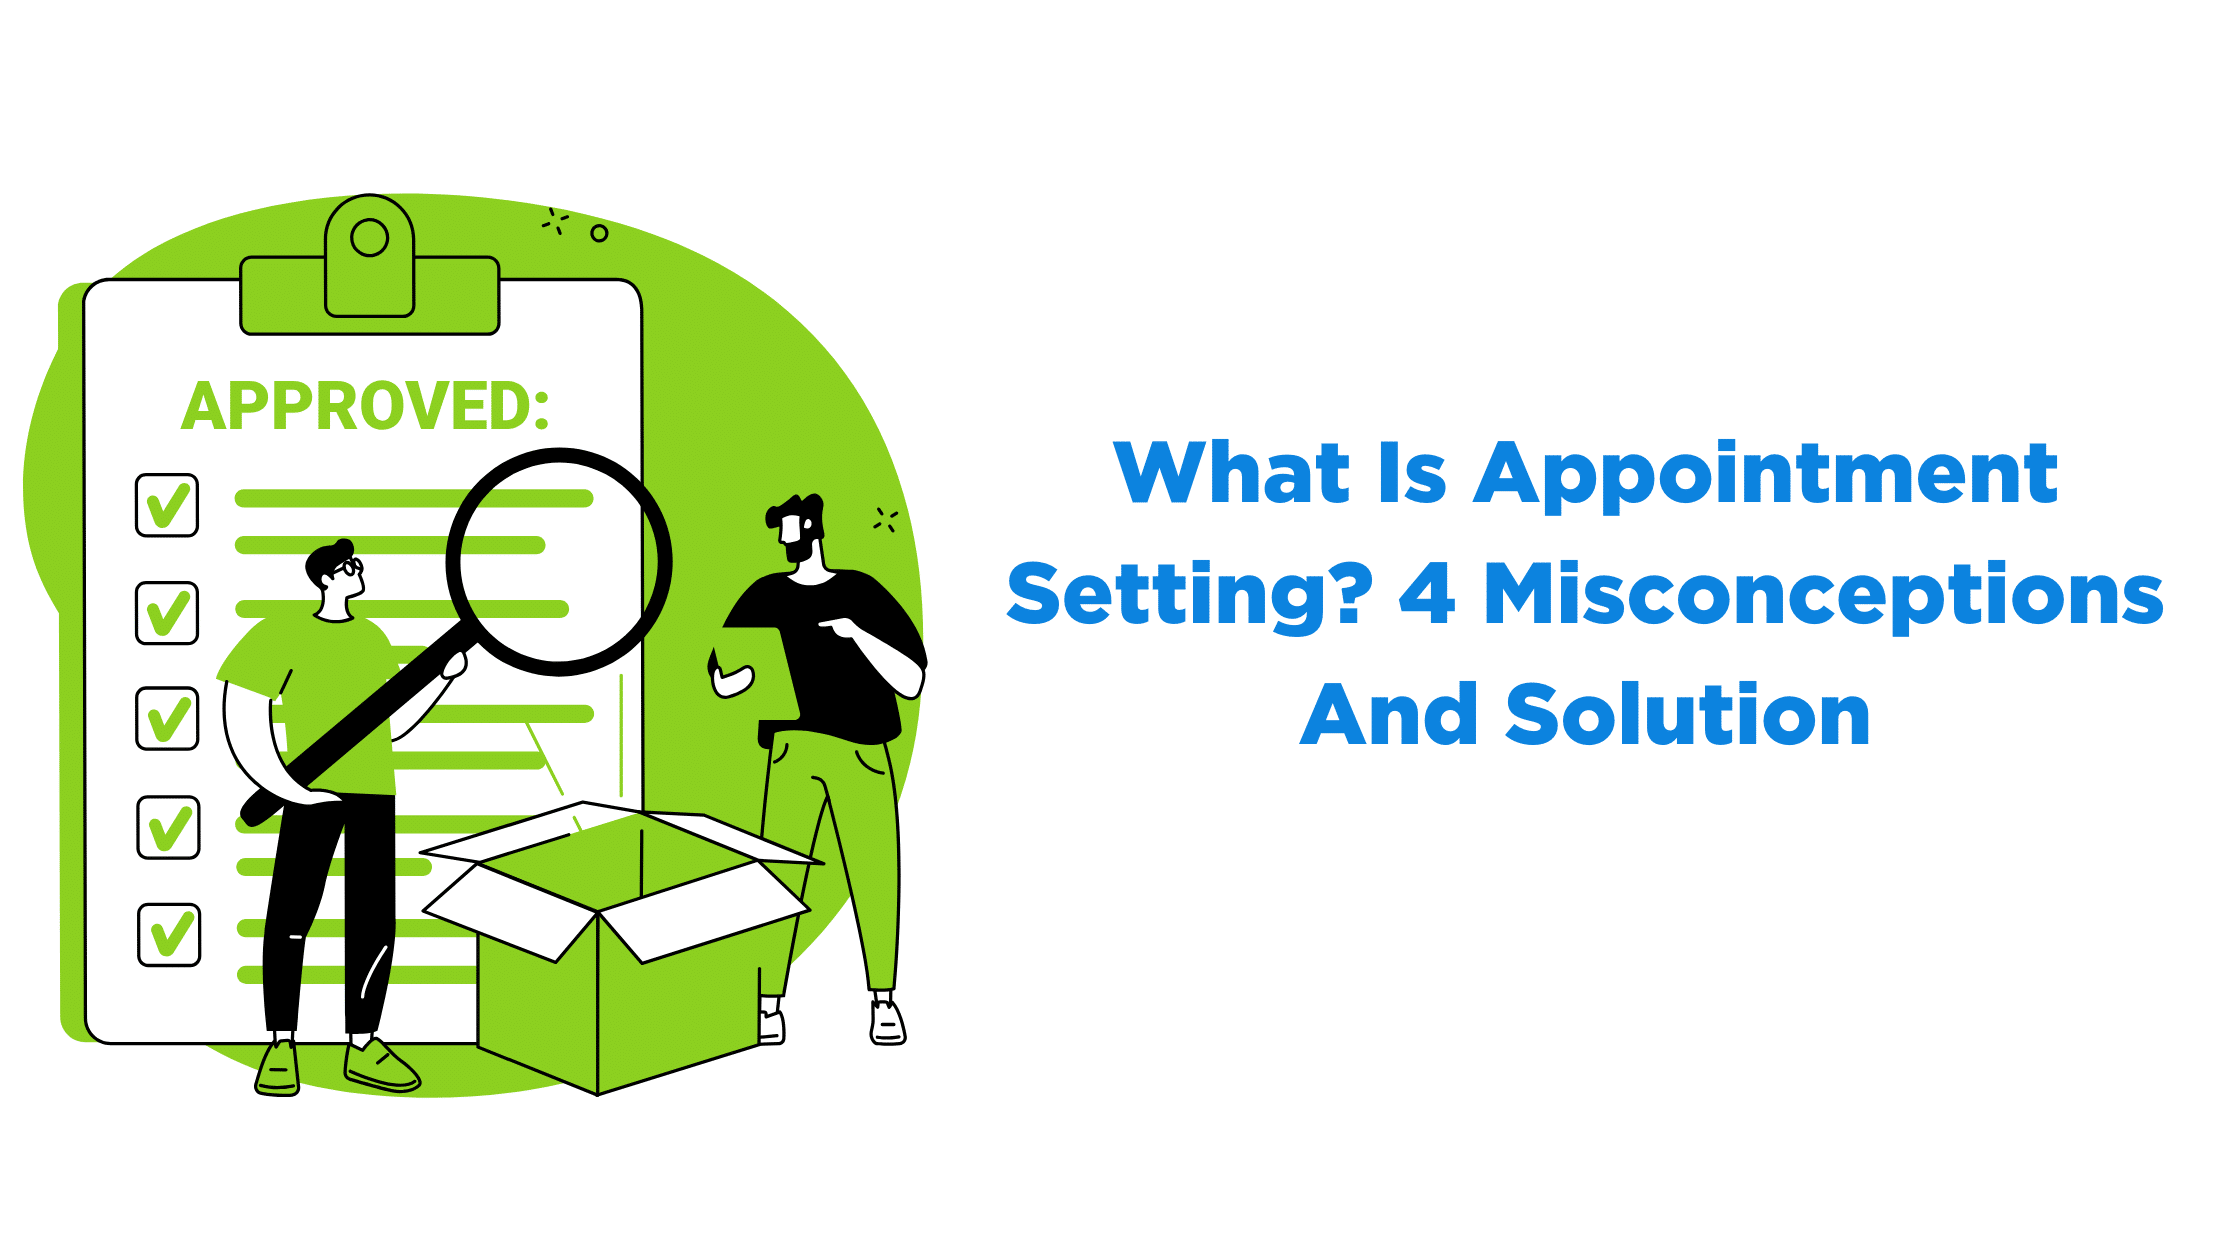 What Is Appointment Setting? 4 Misconceptions And Solution